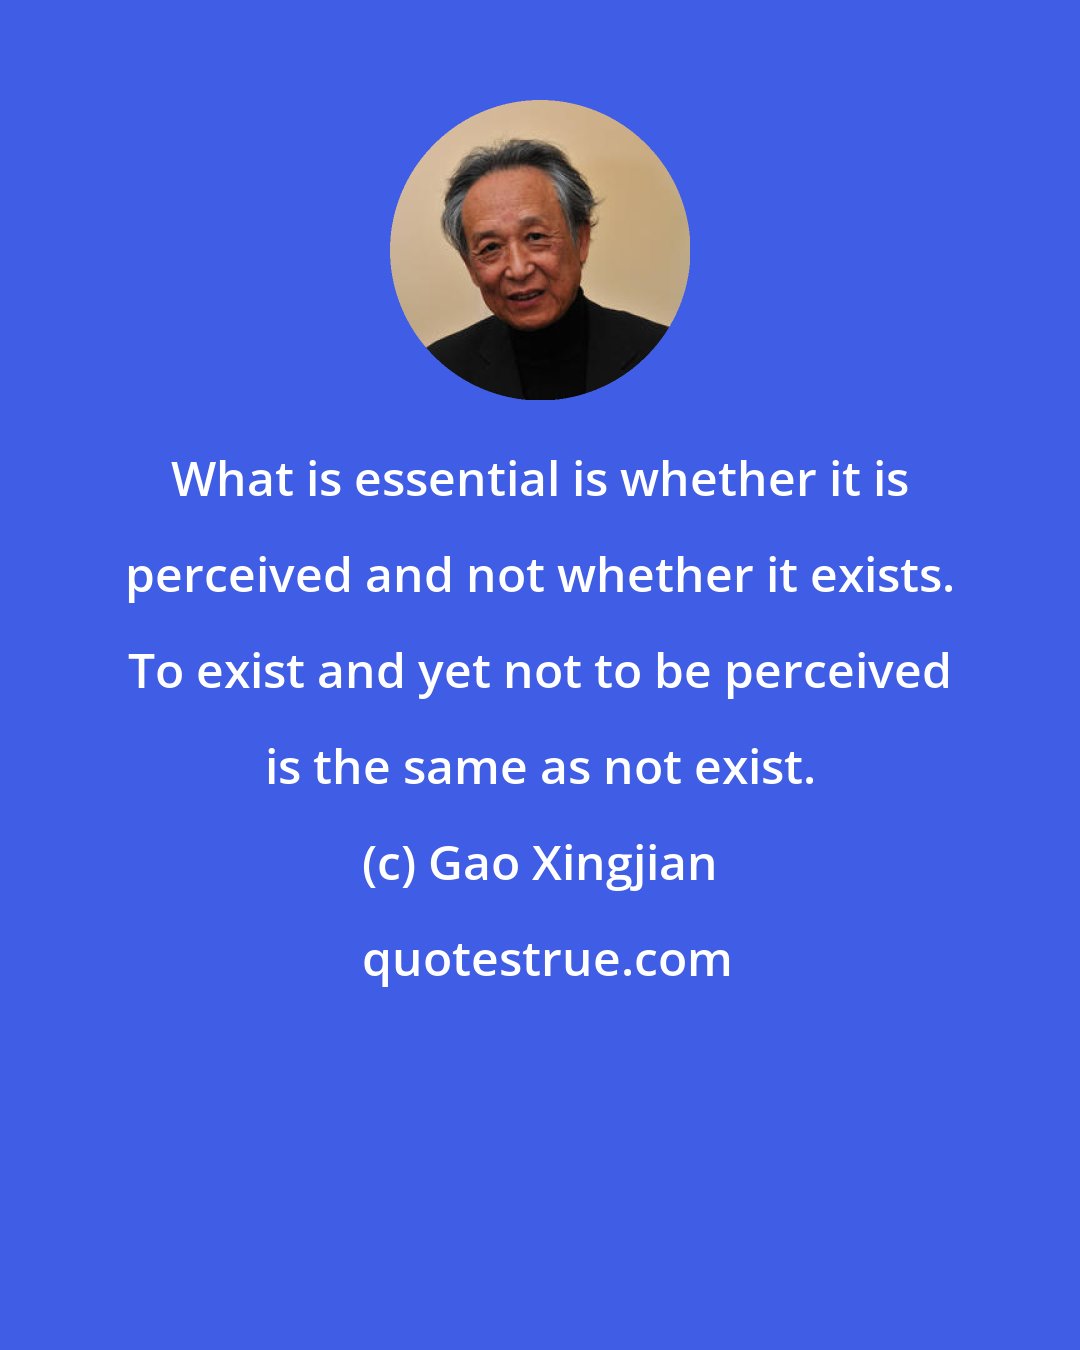 Gao Xingjian: What is essential is whether it is perceived and not whether it exists. To exist and yet not to be perceived is the same as not exist.